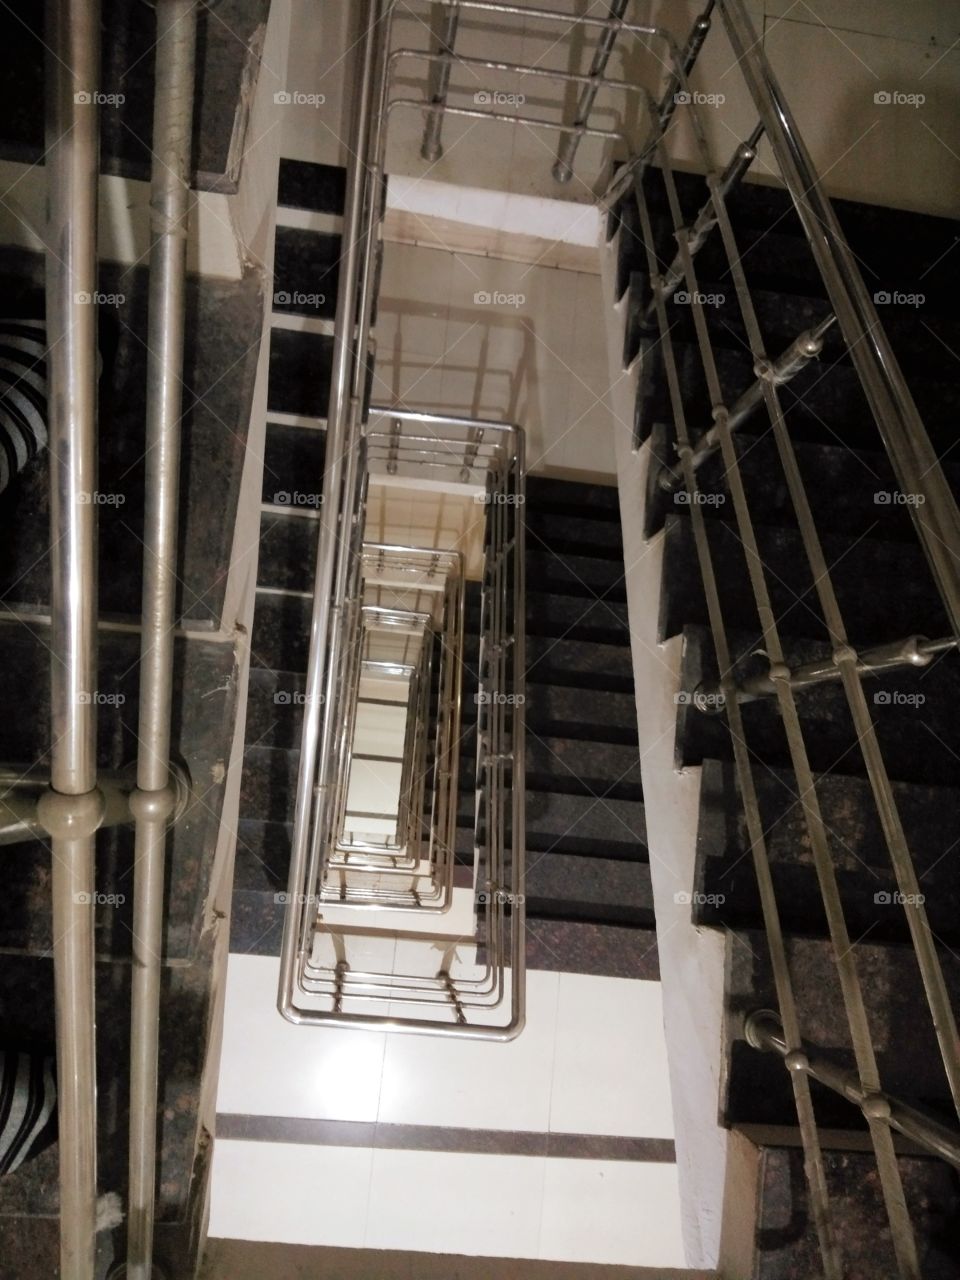 STAIRS IS FOR GOING TO UPWARDS